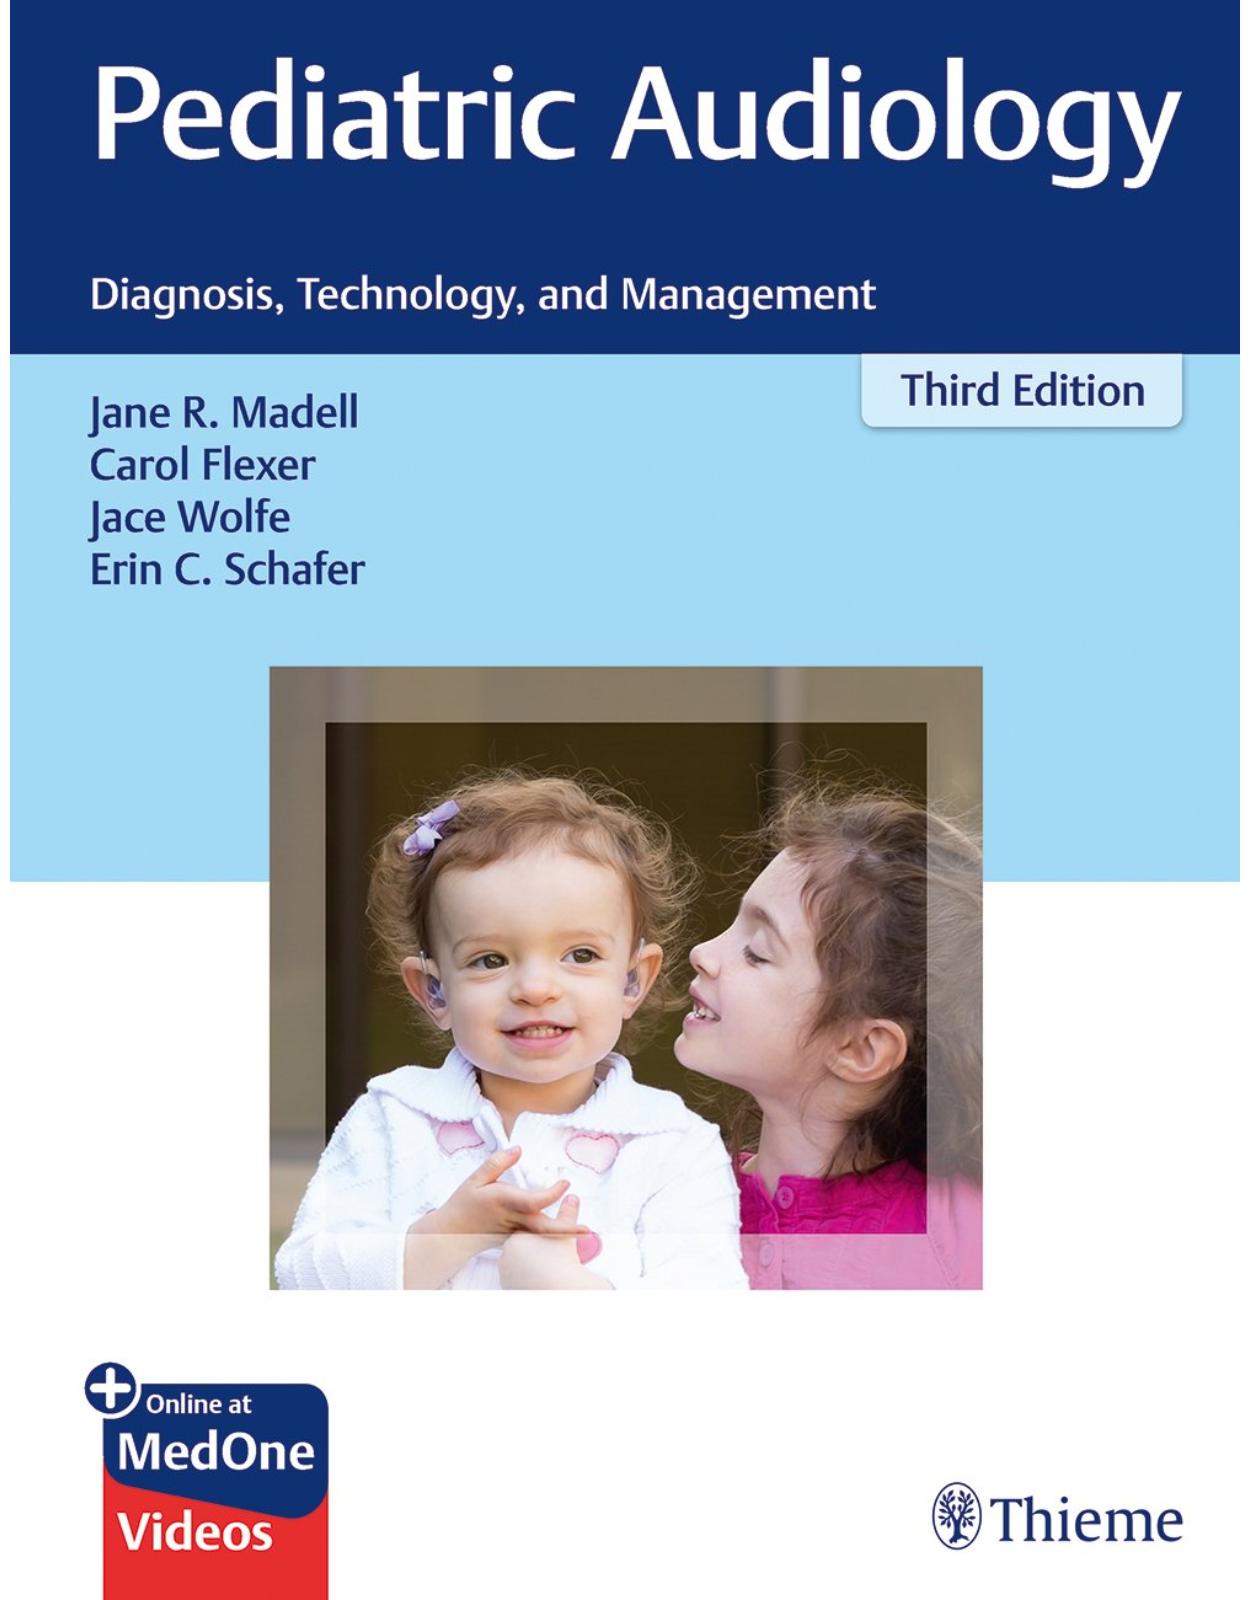 Pediatric Audiology: Diagnosis, Technology, and Management